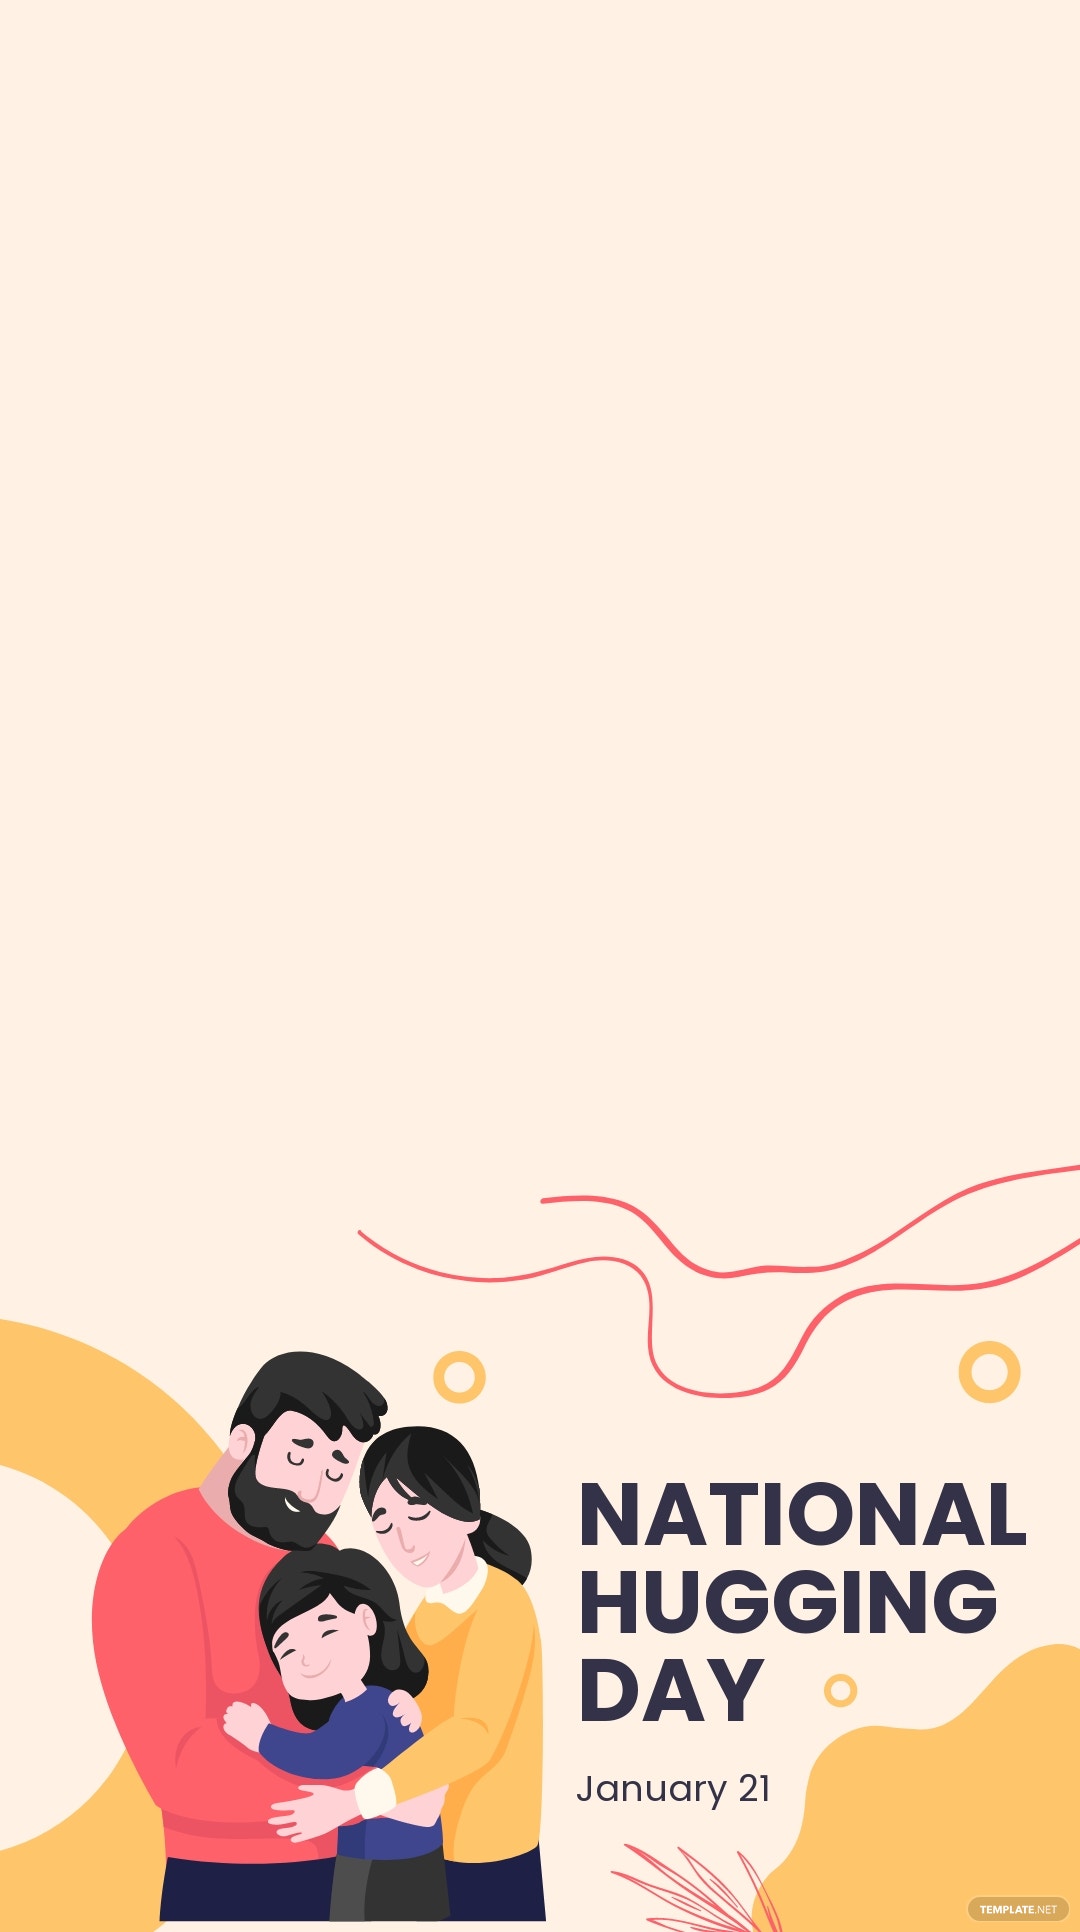 national hugging day snapchat geofilter